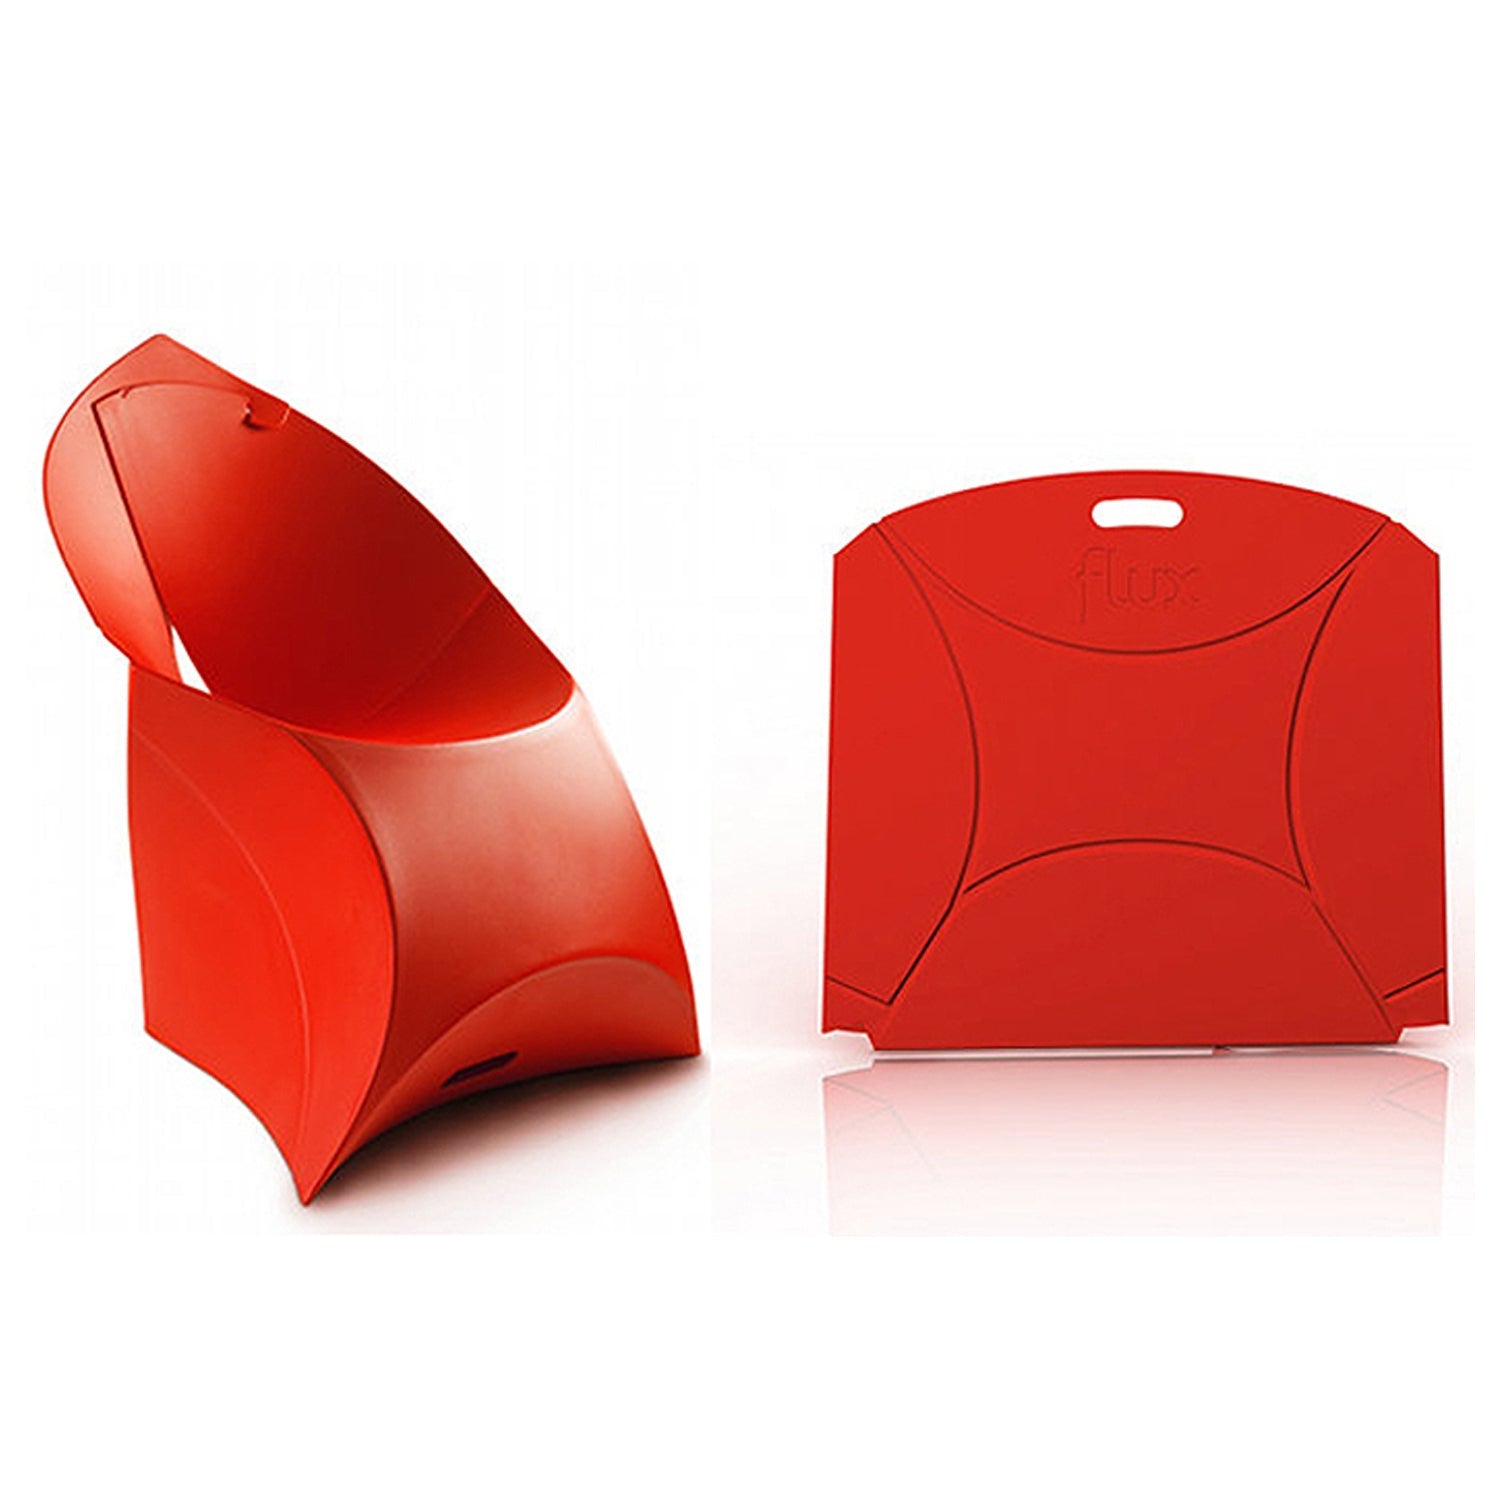 RED FLUX CHAIR